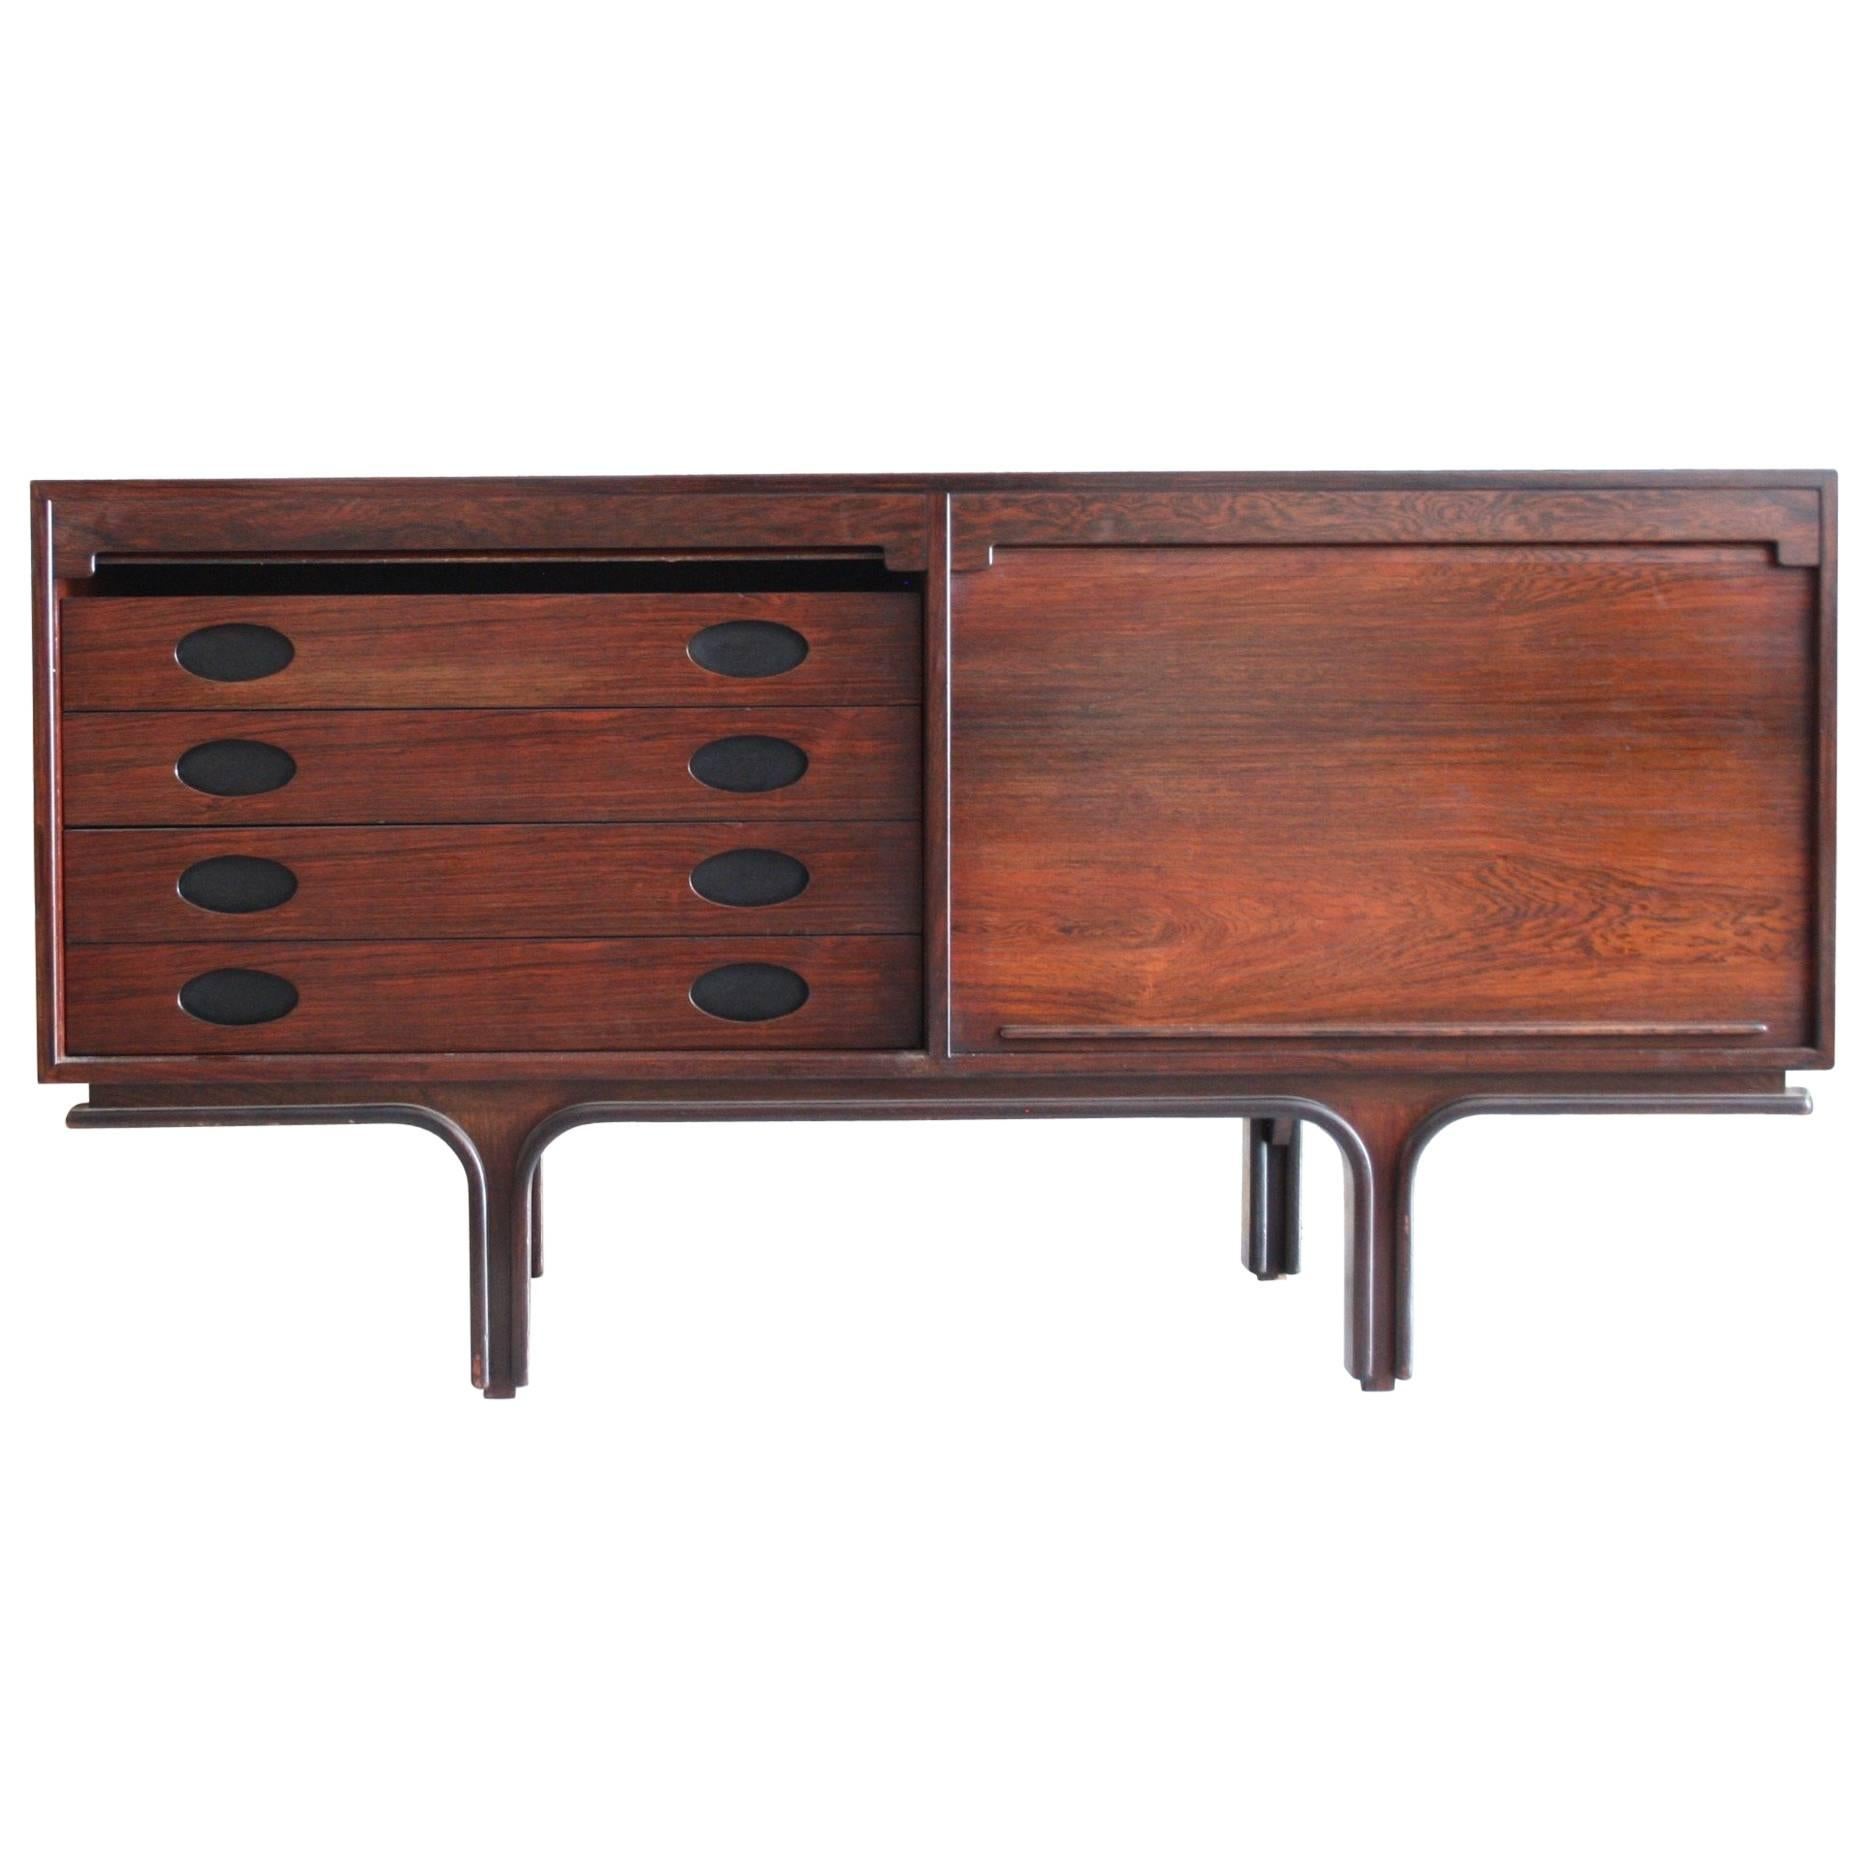 Small Rosewood Sideboard by Gianfranco Frattini for Bernini Italy